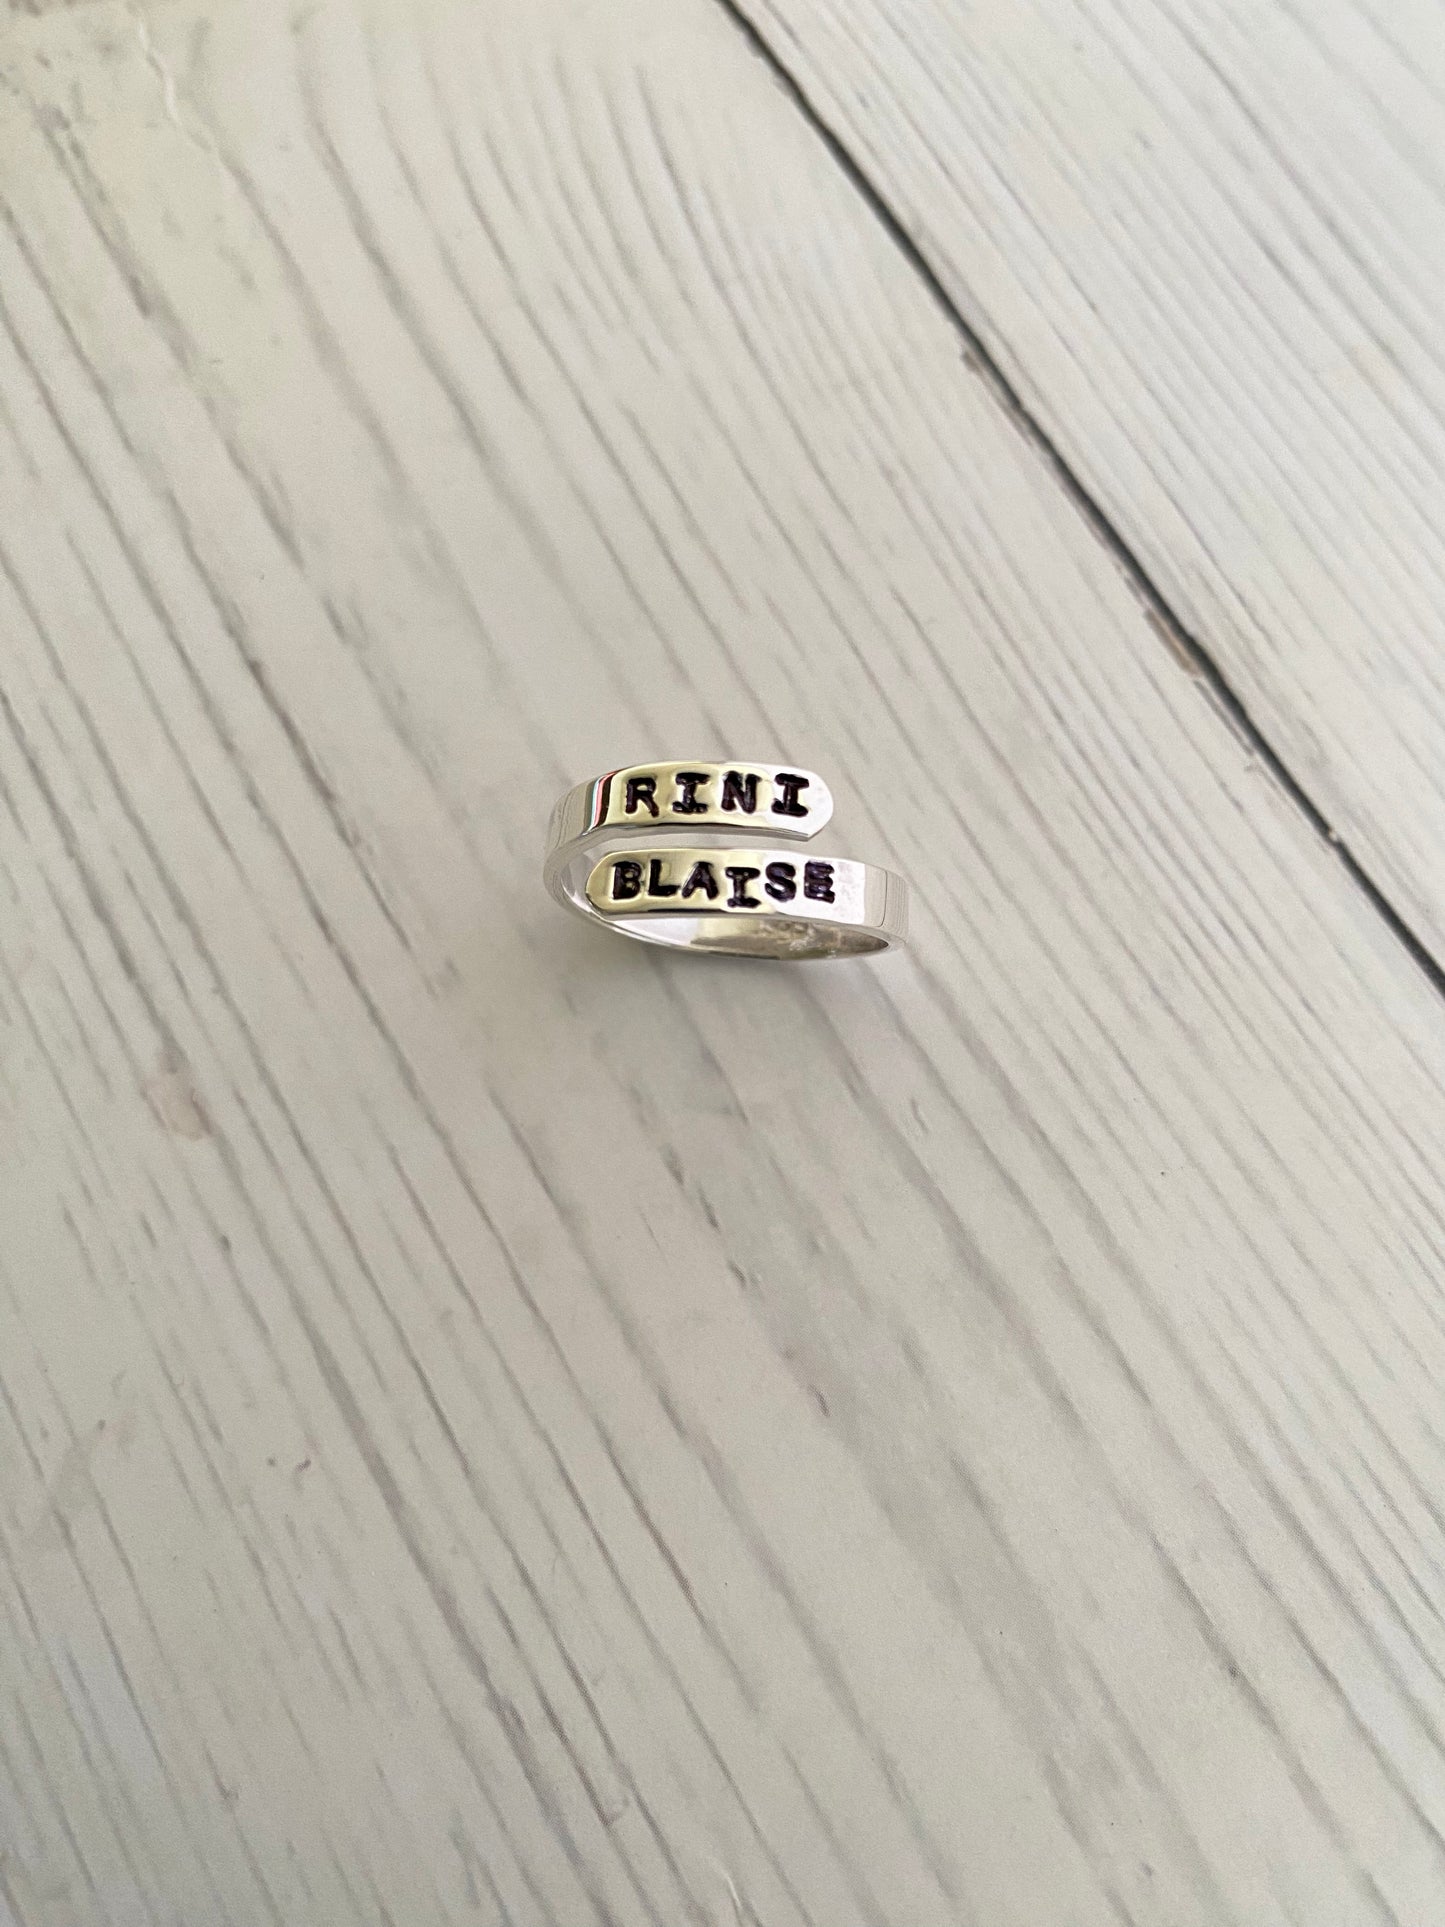 Couple Initials Ring in 92.5 sterling silver